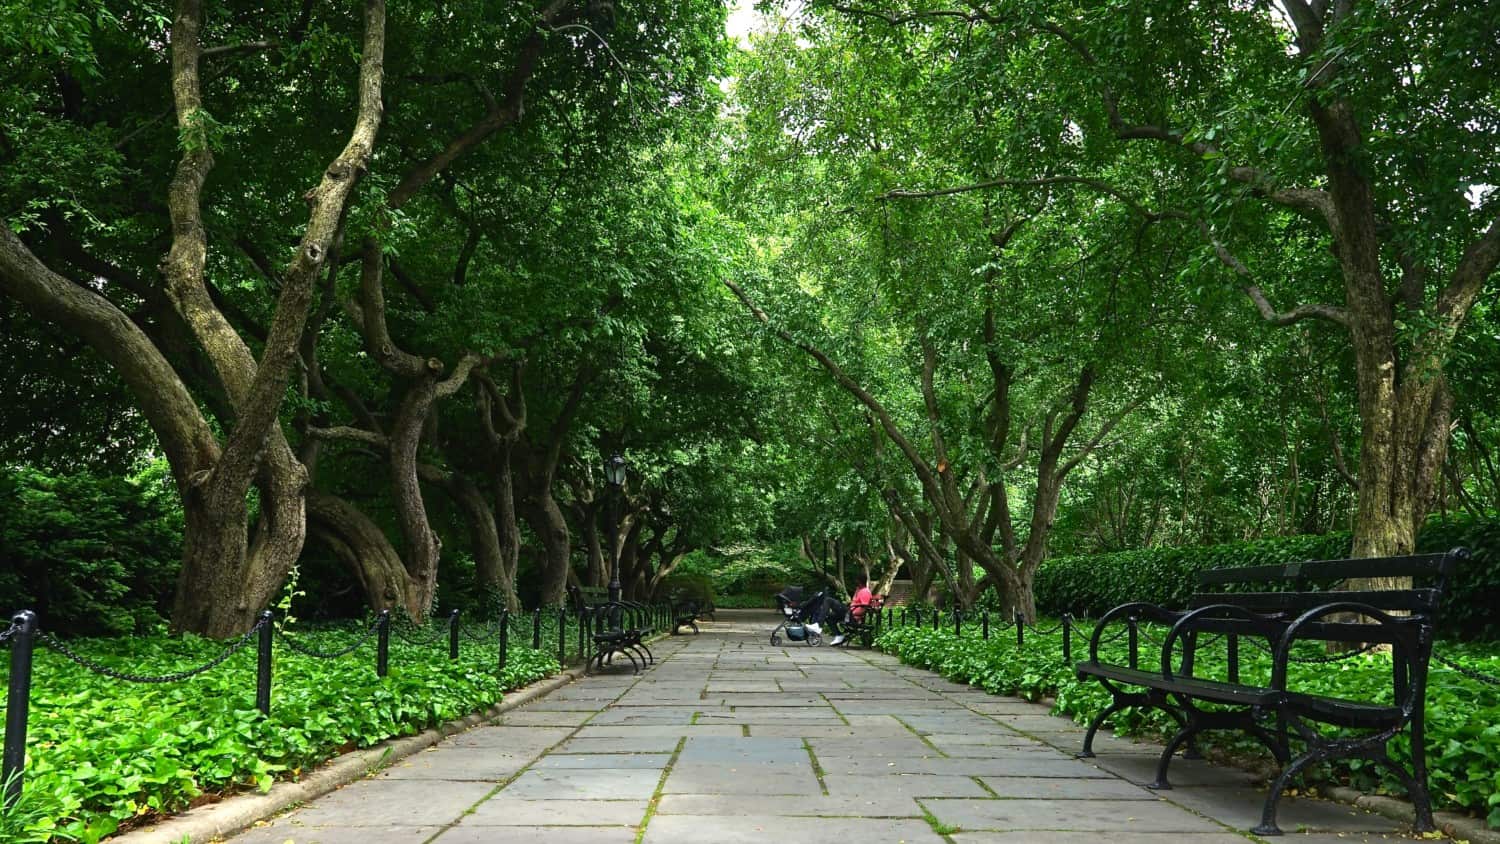 New York's Top Pet Friendly Attraction: Central Park | GoPetFriendly.com